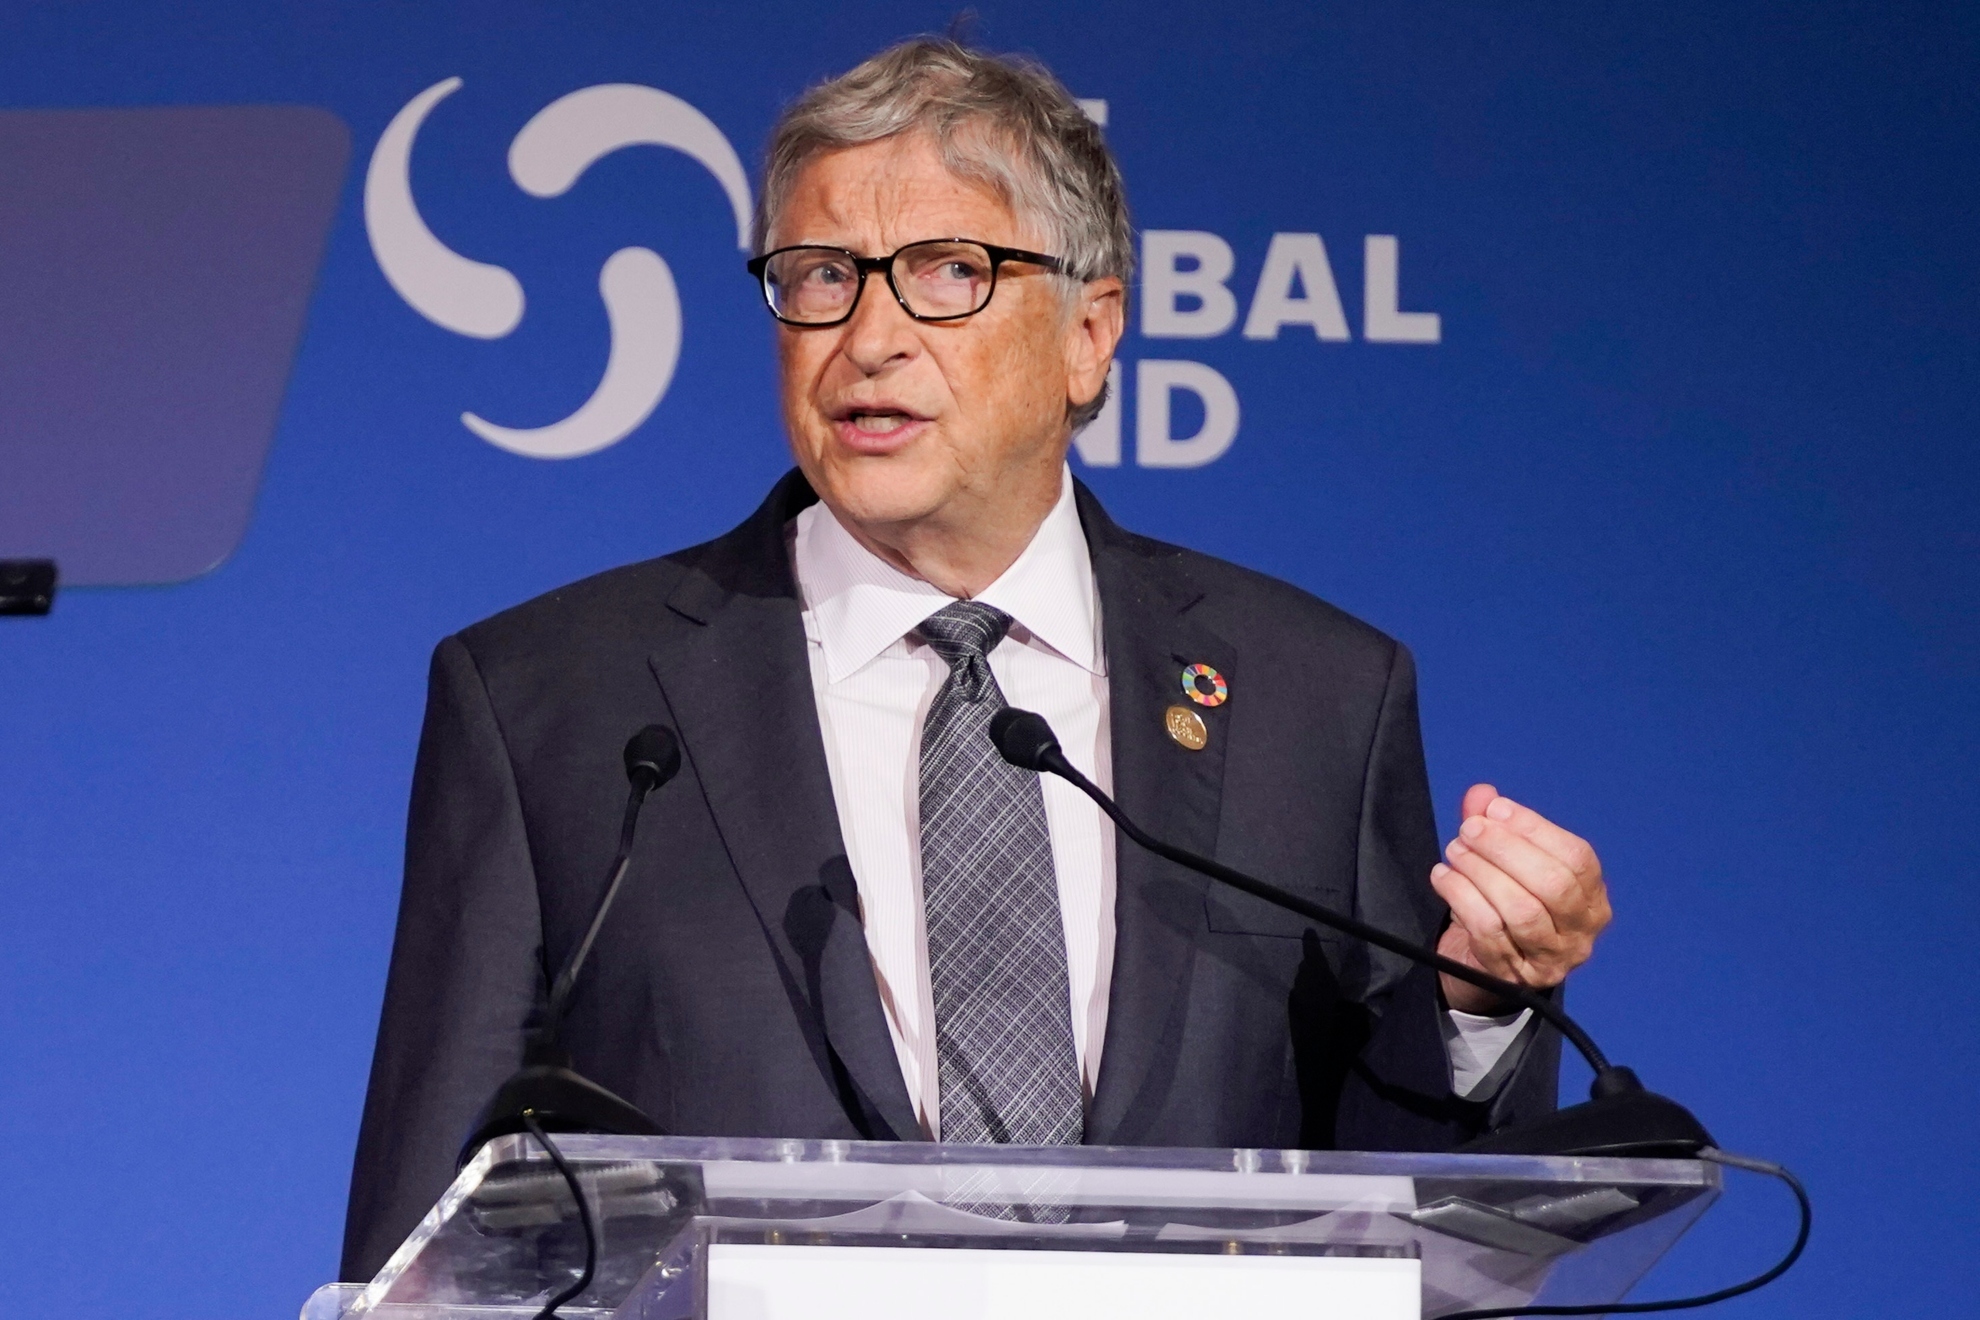 Bill Gates speaks during the Global Fund's Seventh Replenishment Conference, Wednesday, Sept. 21, 2022, in New York. / AP